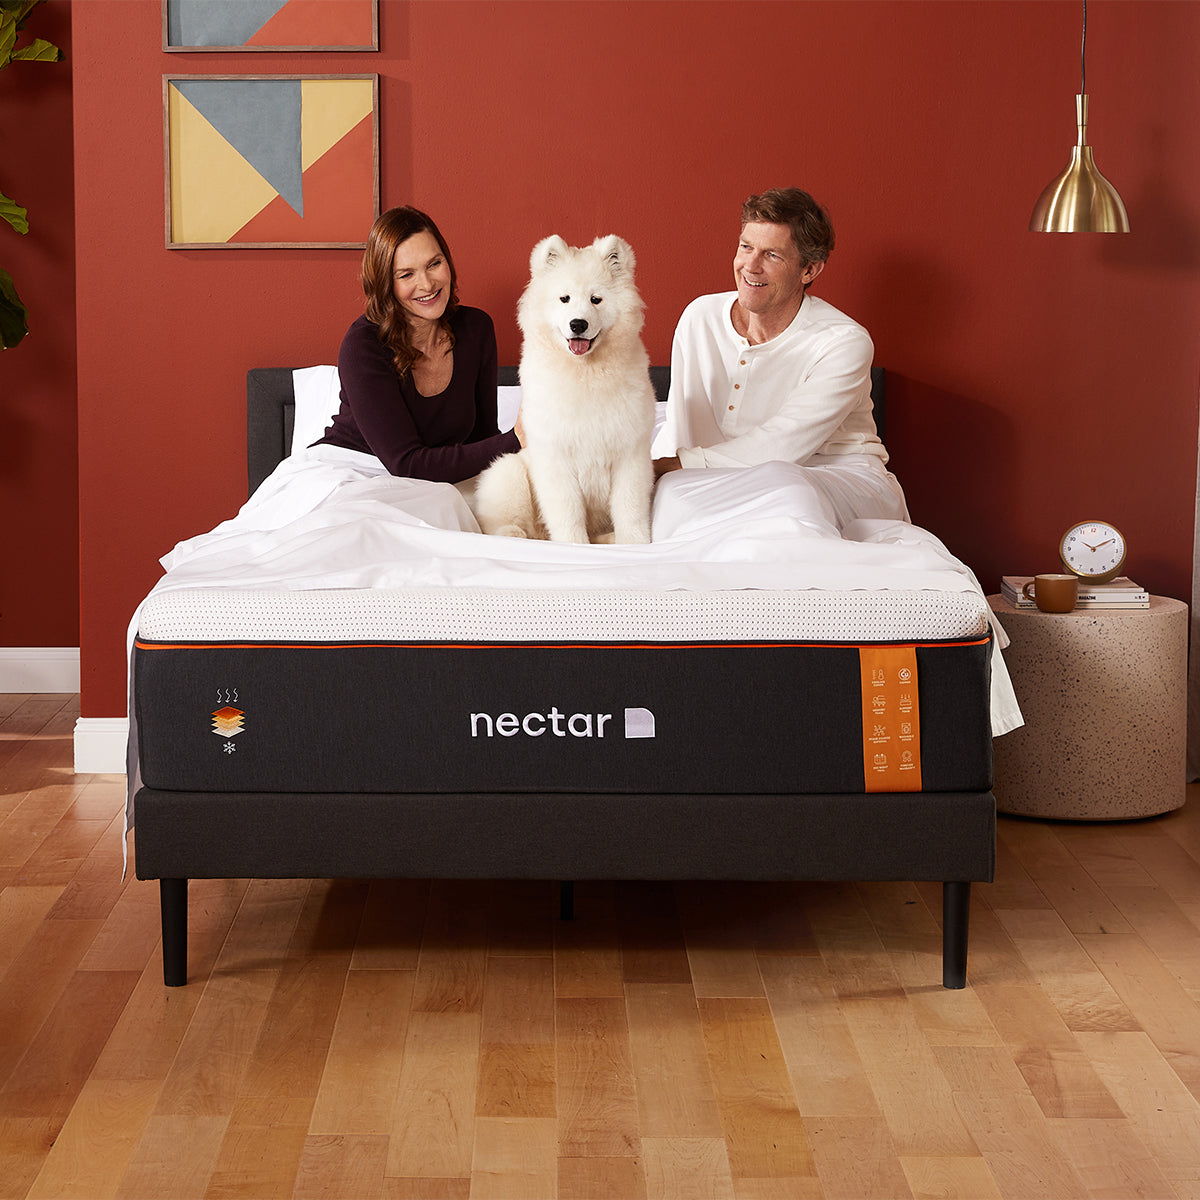 Nectar Premier Copper Memory Foam Mattress In Bedroom With Couple And Puppy